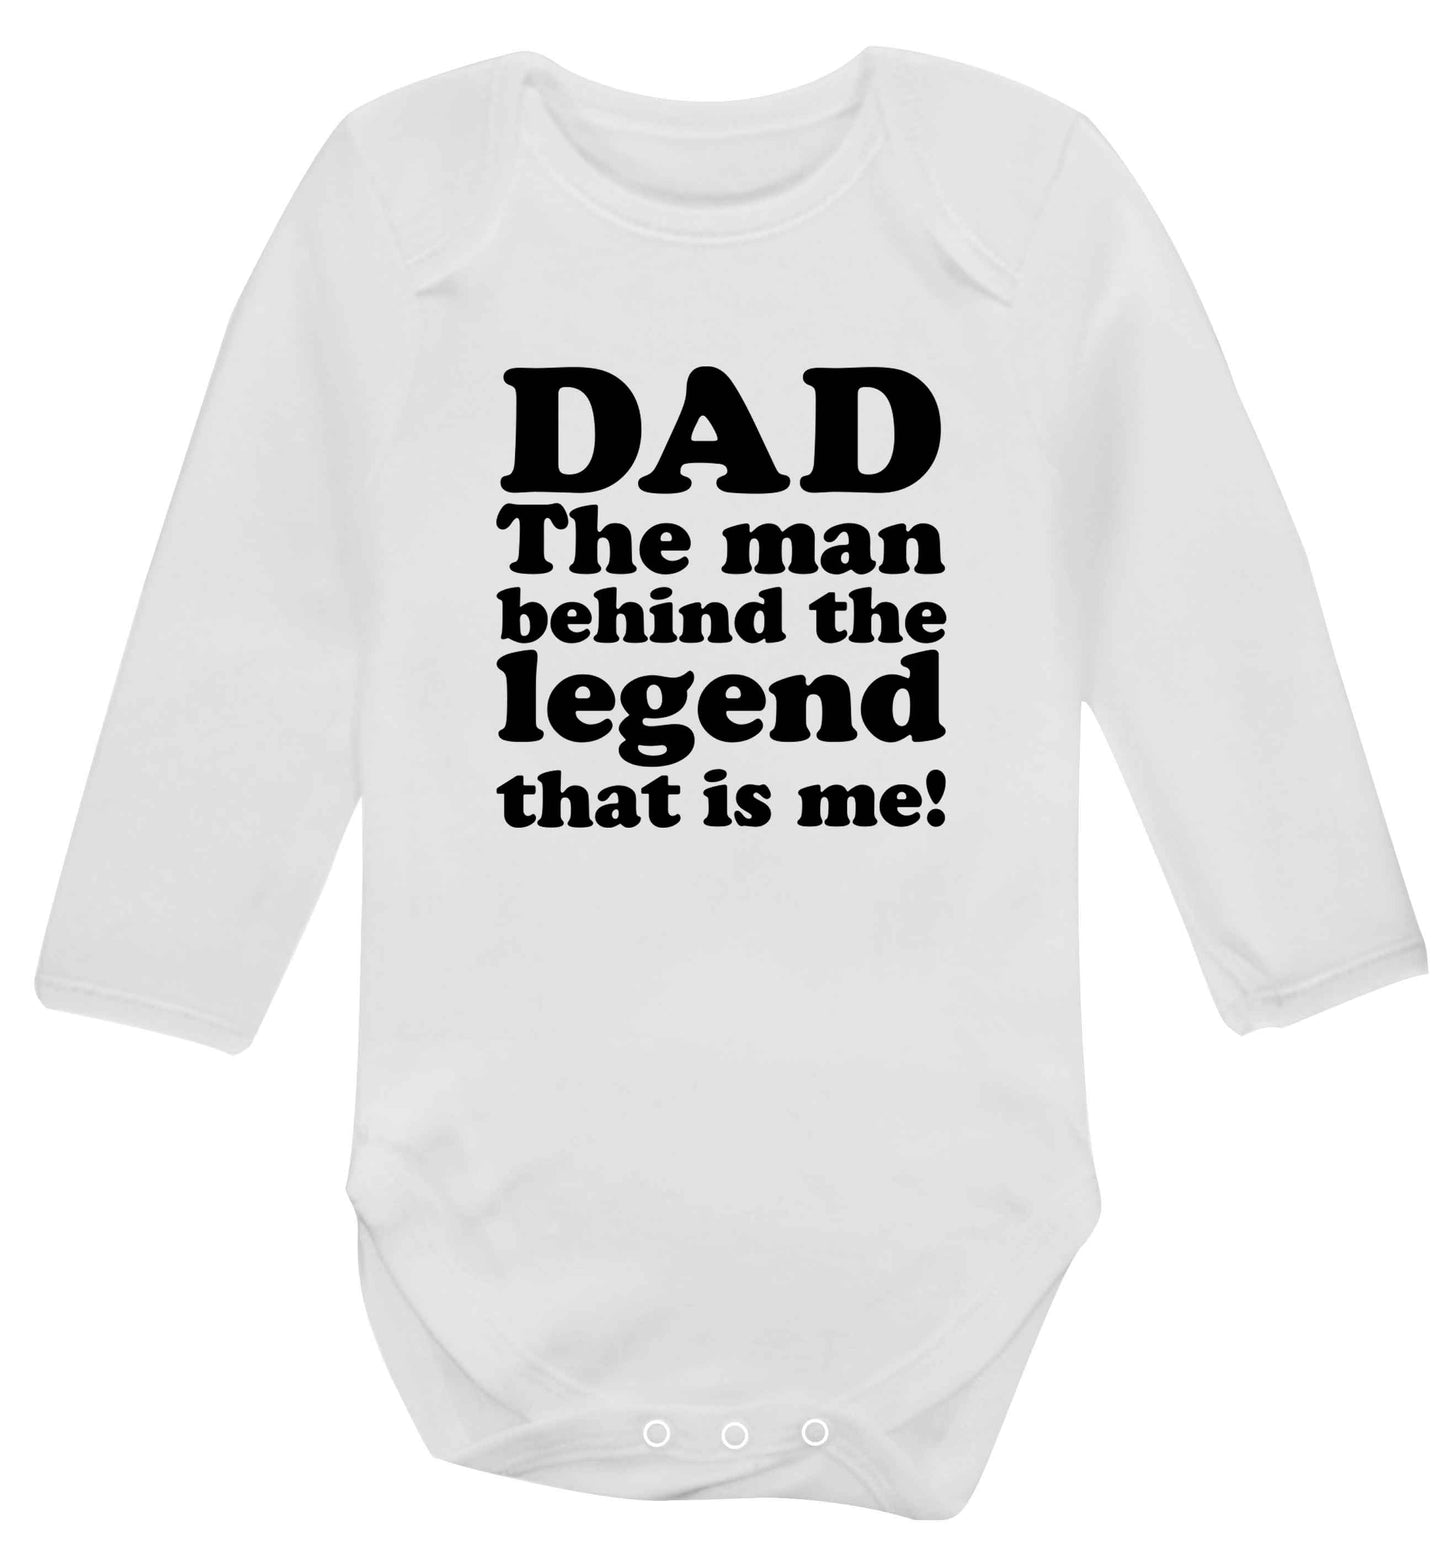 Dad the man behind the legend that is me baby vest long sleeved white 6-12 months